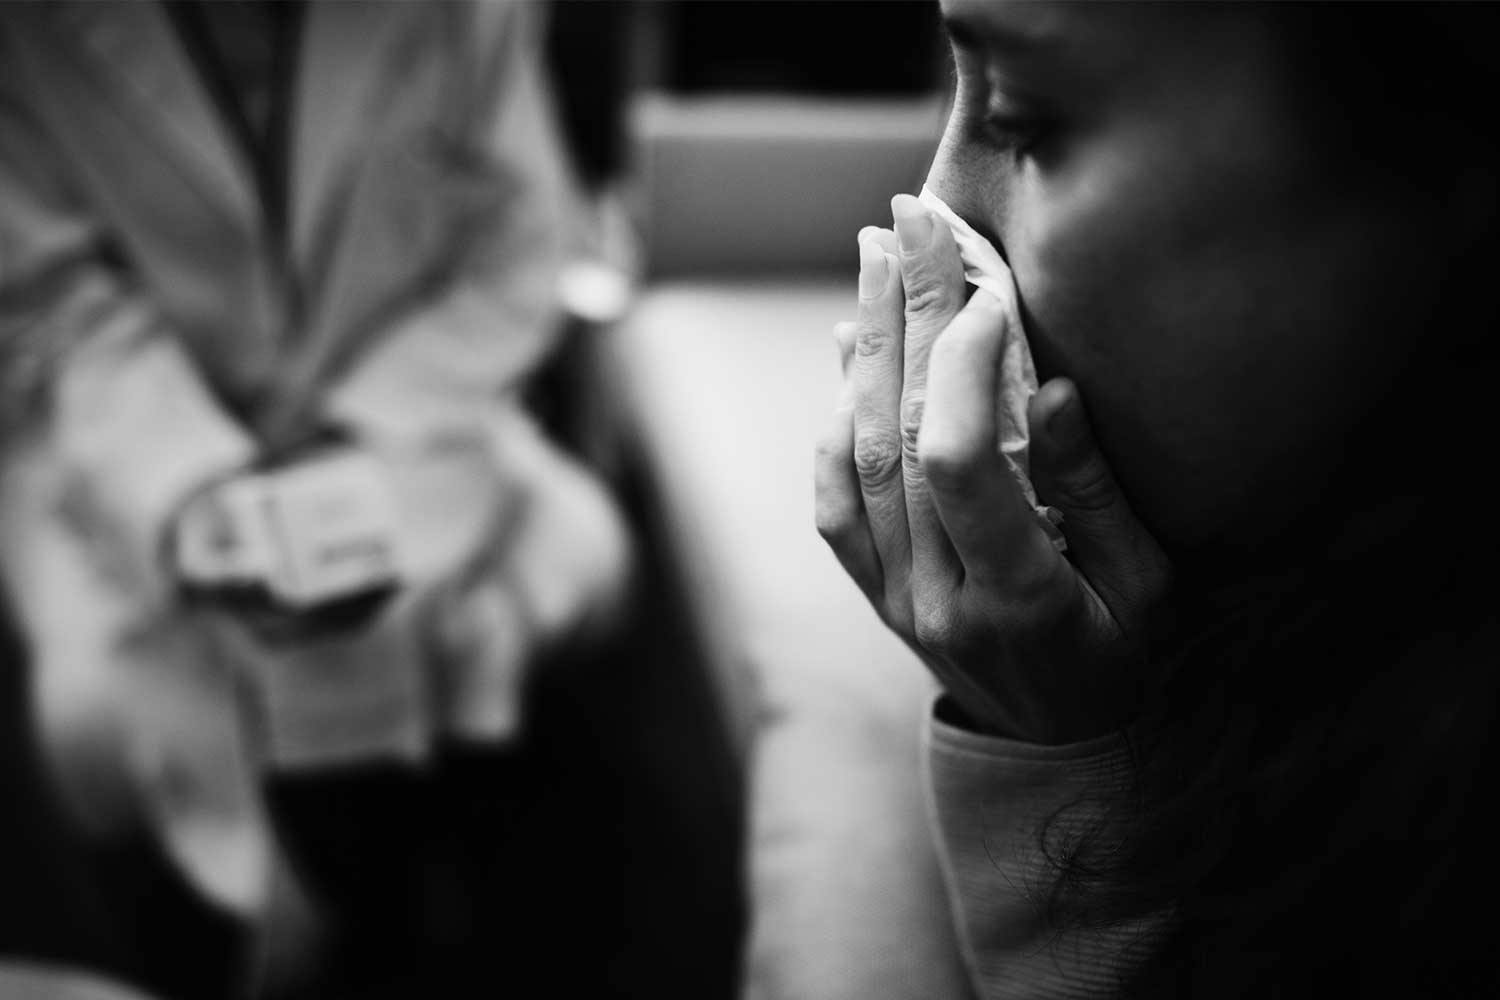 A woman sitting across from a doctor wipes her nose with a tissue.